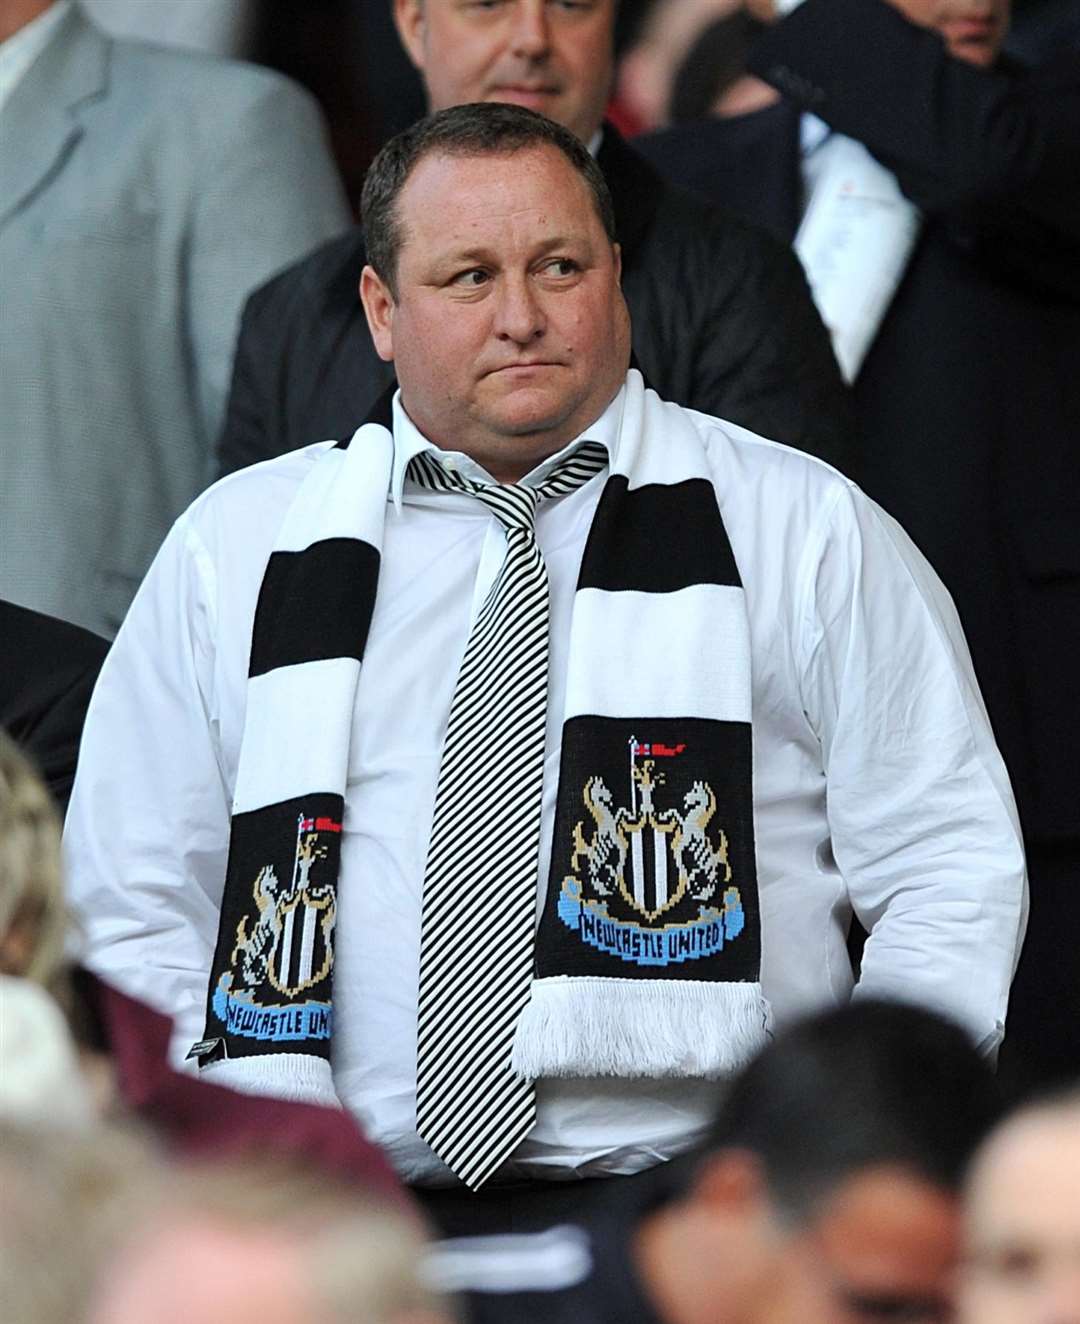 Mike Ashley sold Newcastle United last year after a tumultuous ownership of the Premier League club (Owen Humphreys/PA)